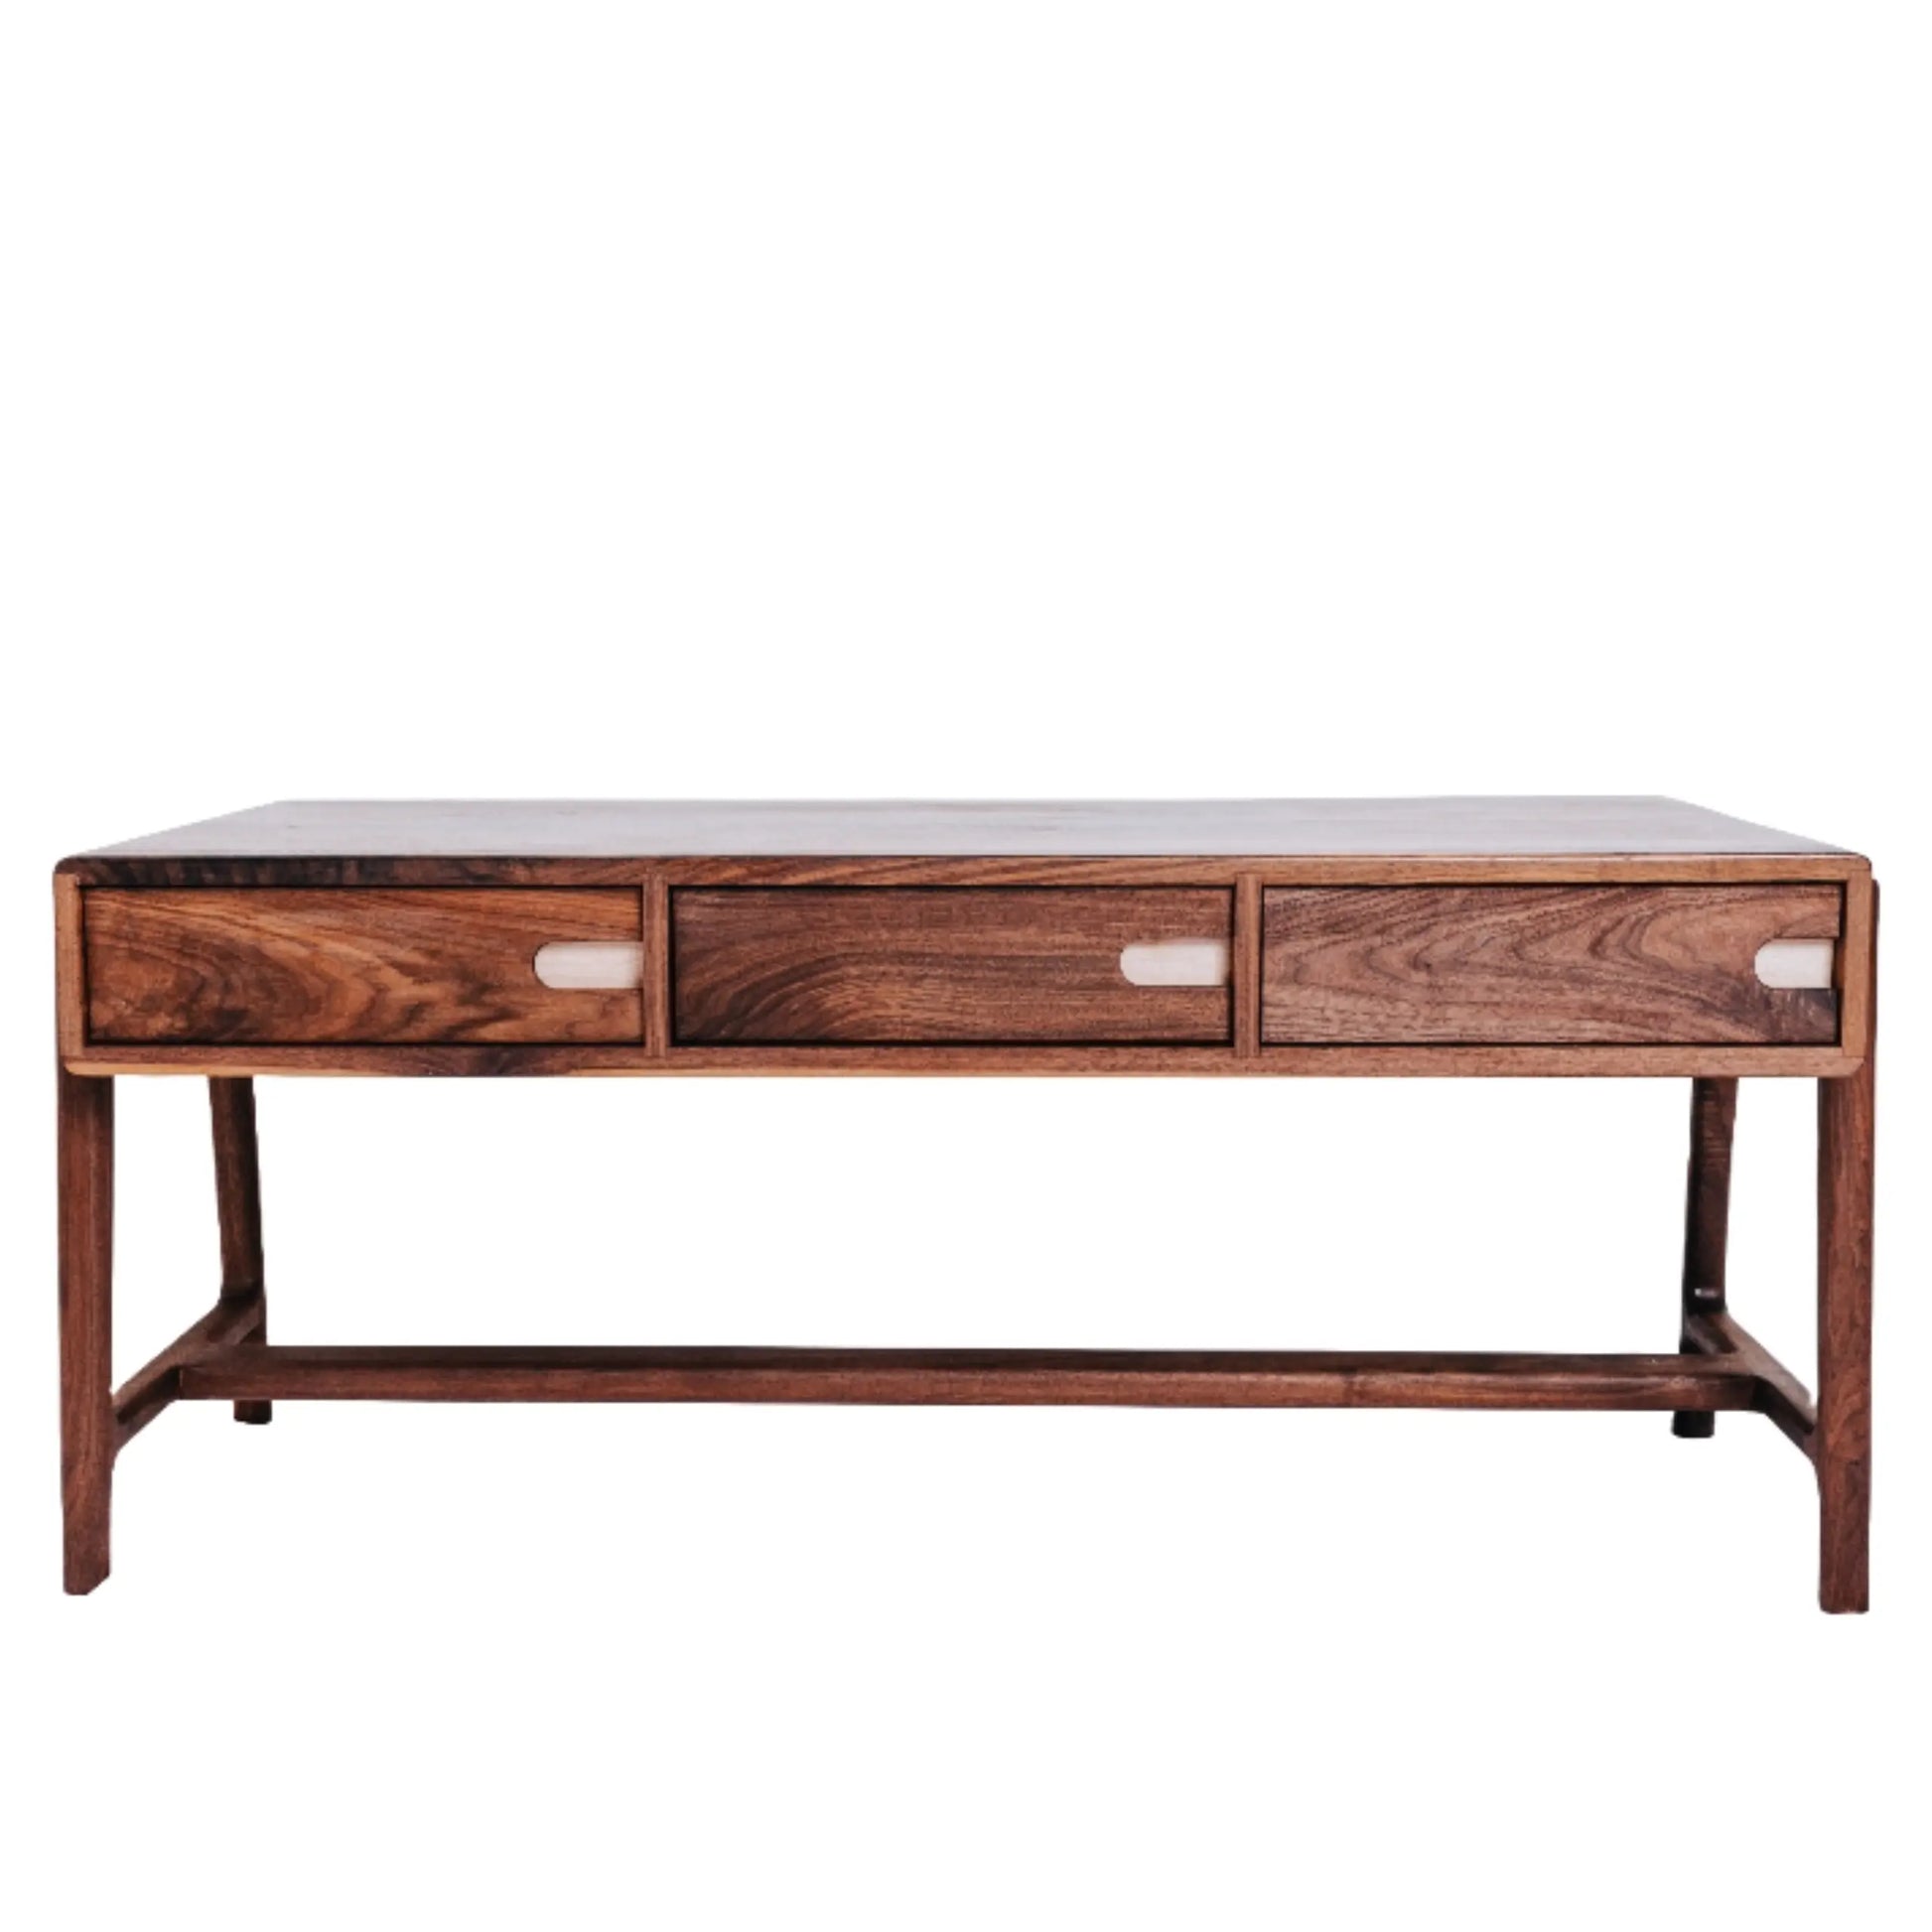 Artisan-crafted Fjord coffee table, integrating Scandinavian design with durable black walnut and rock maple, a centerpiece for eco-conscious homes.